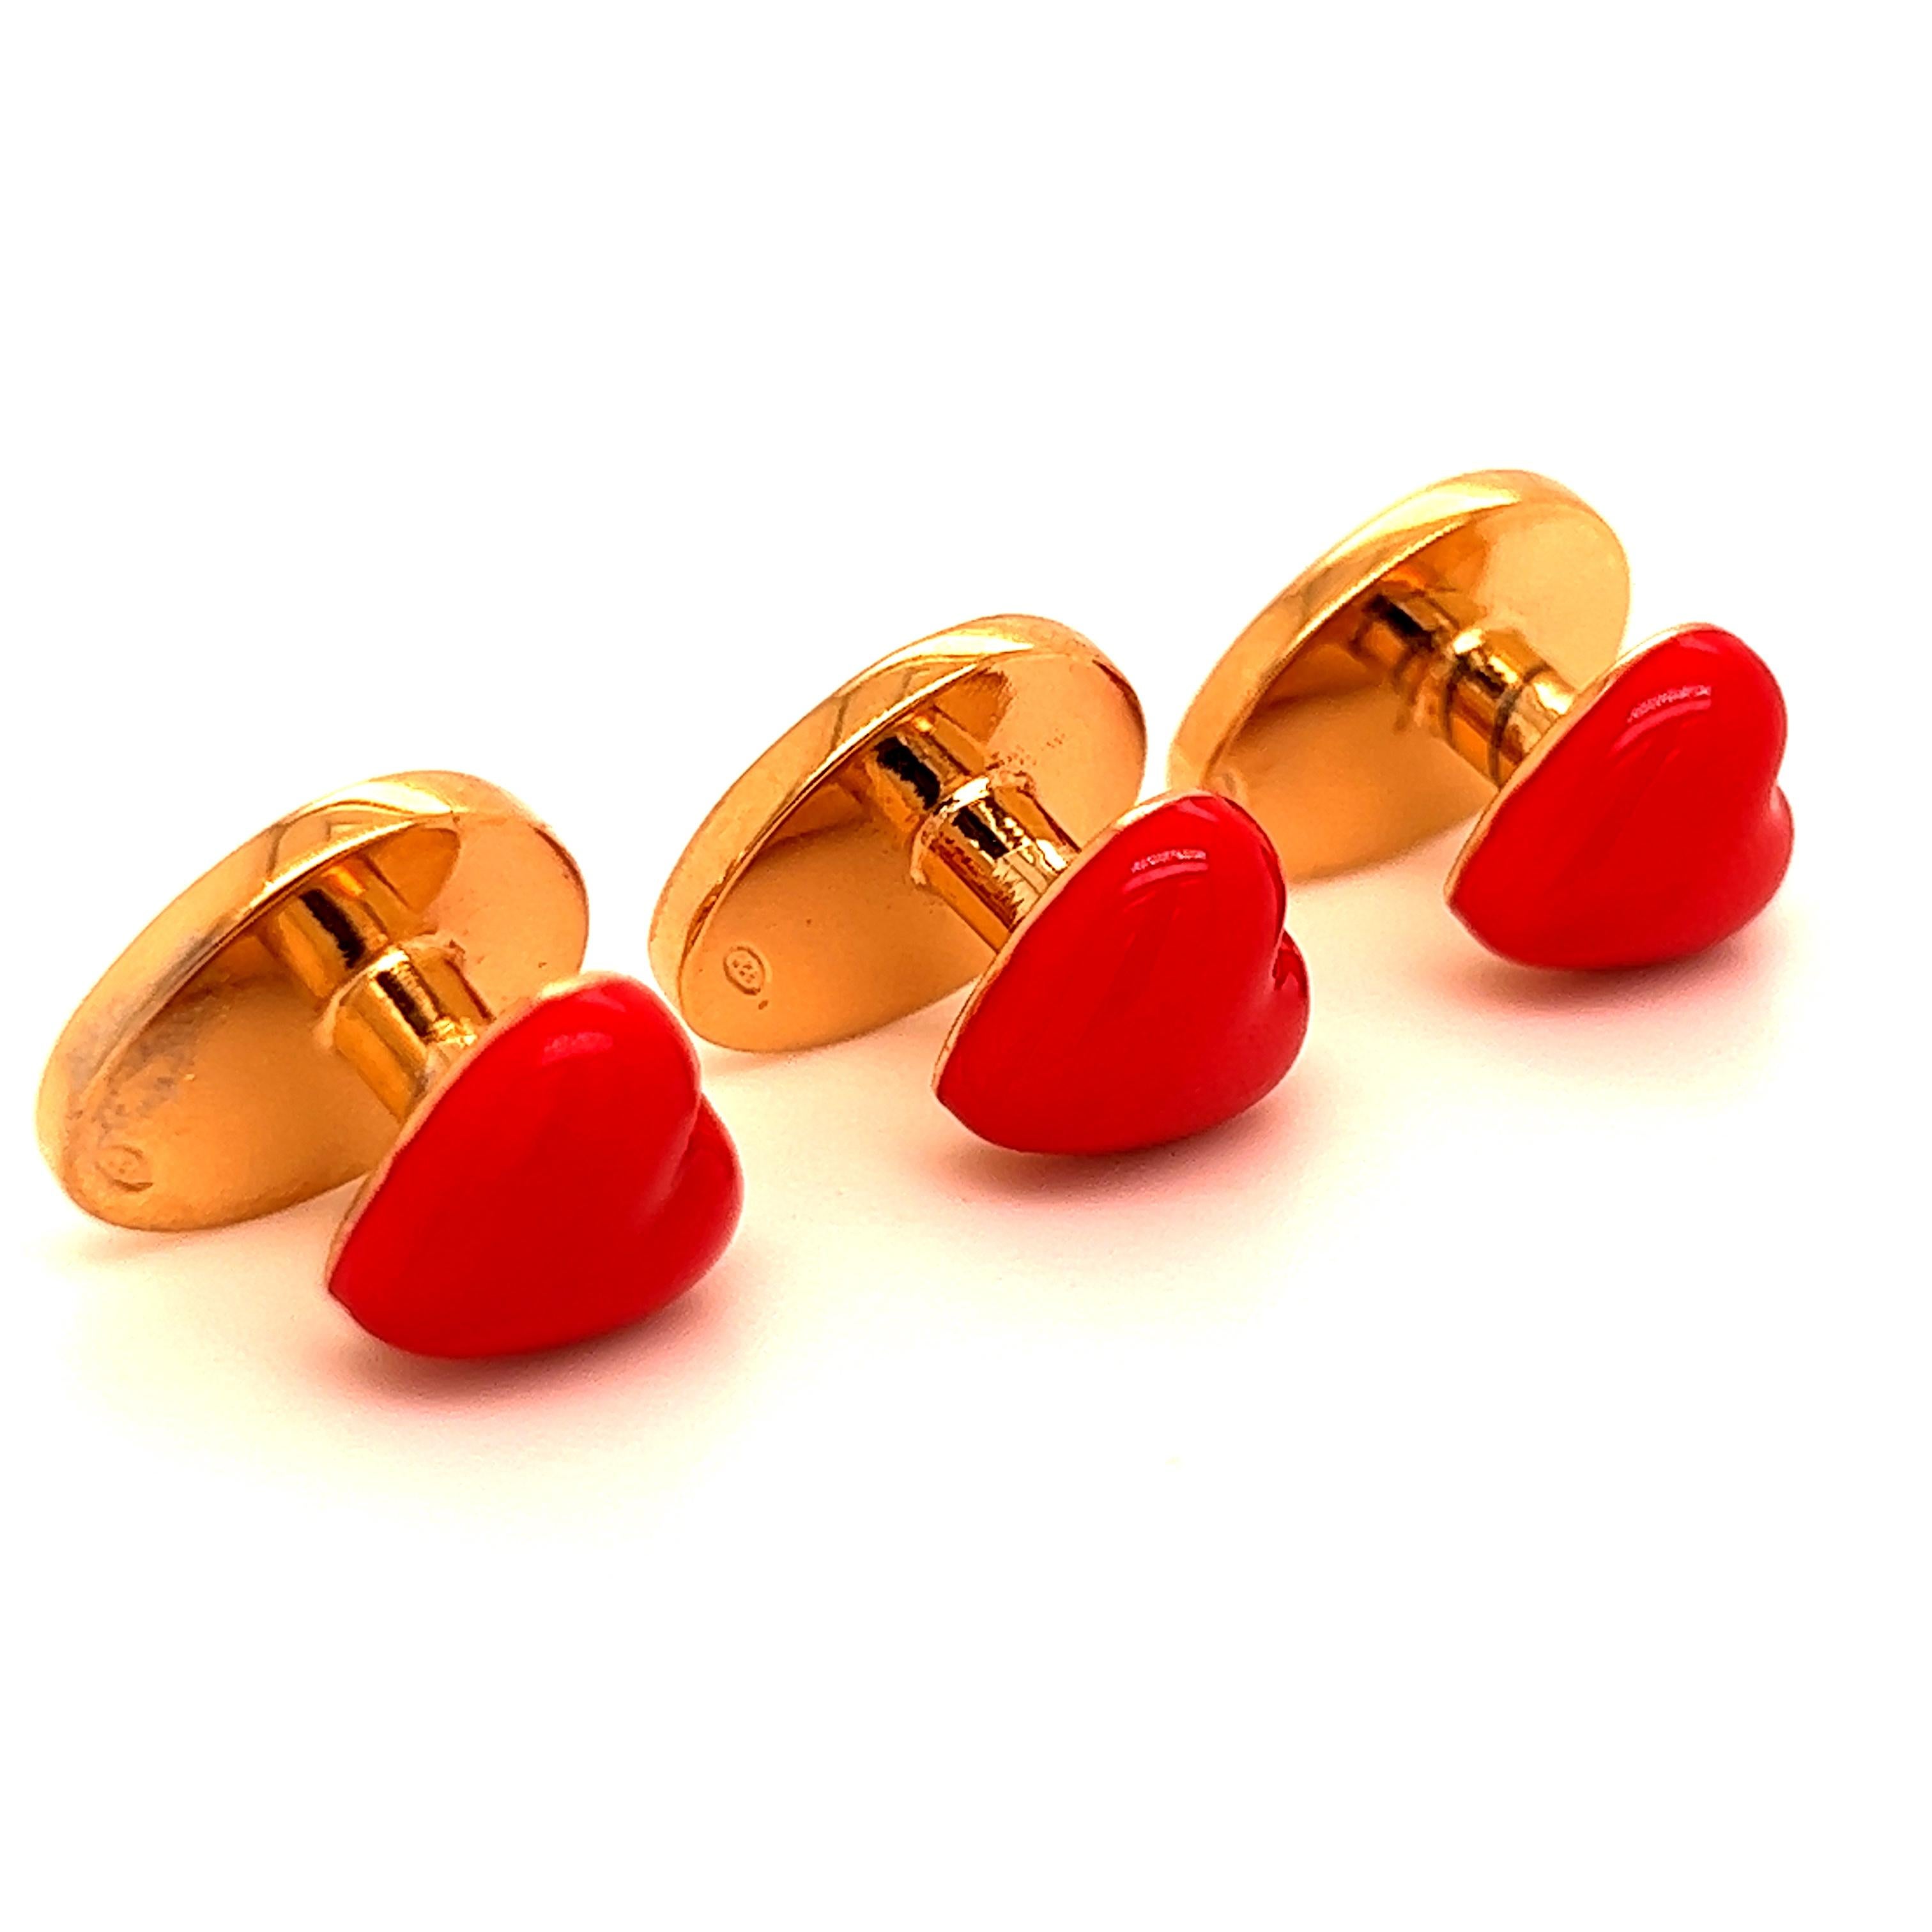 Unique, absolutely Chic yet Timeless Red Heart Cabochon Shaped Hand Enamelled Sterling Silver Gold-Plated Setting Stud Set. This piece matches perfectly with our red heart sterling silver gold plated cufflinks.
In our fitted smart Suede Leather Case